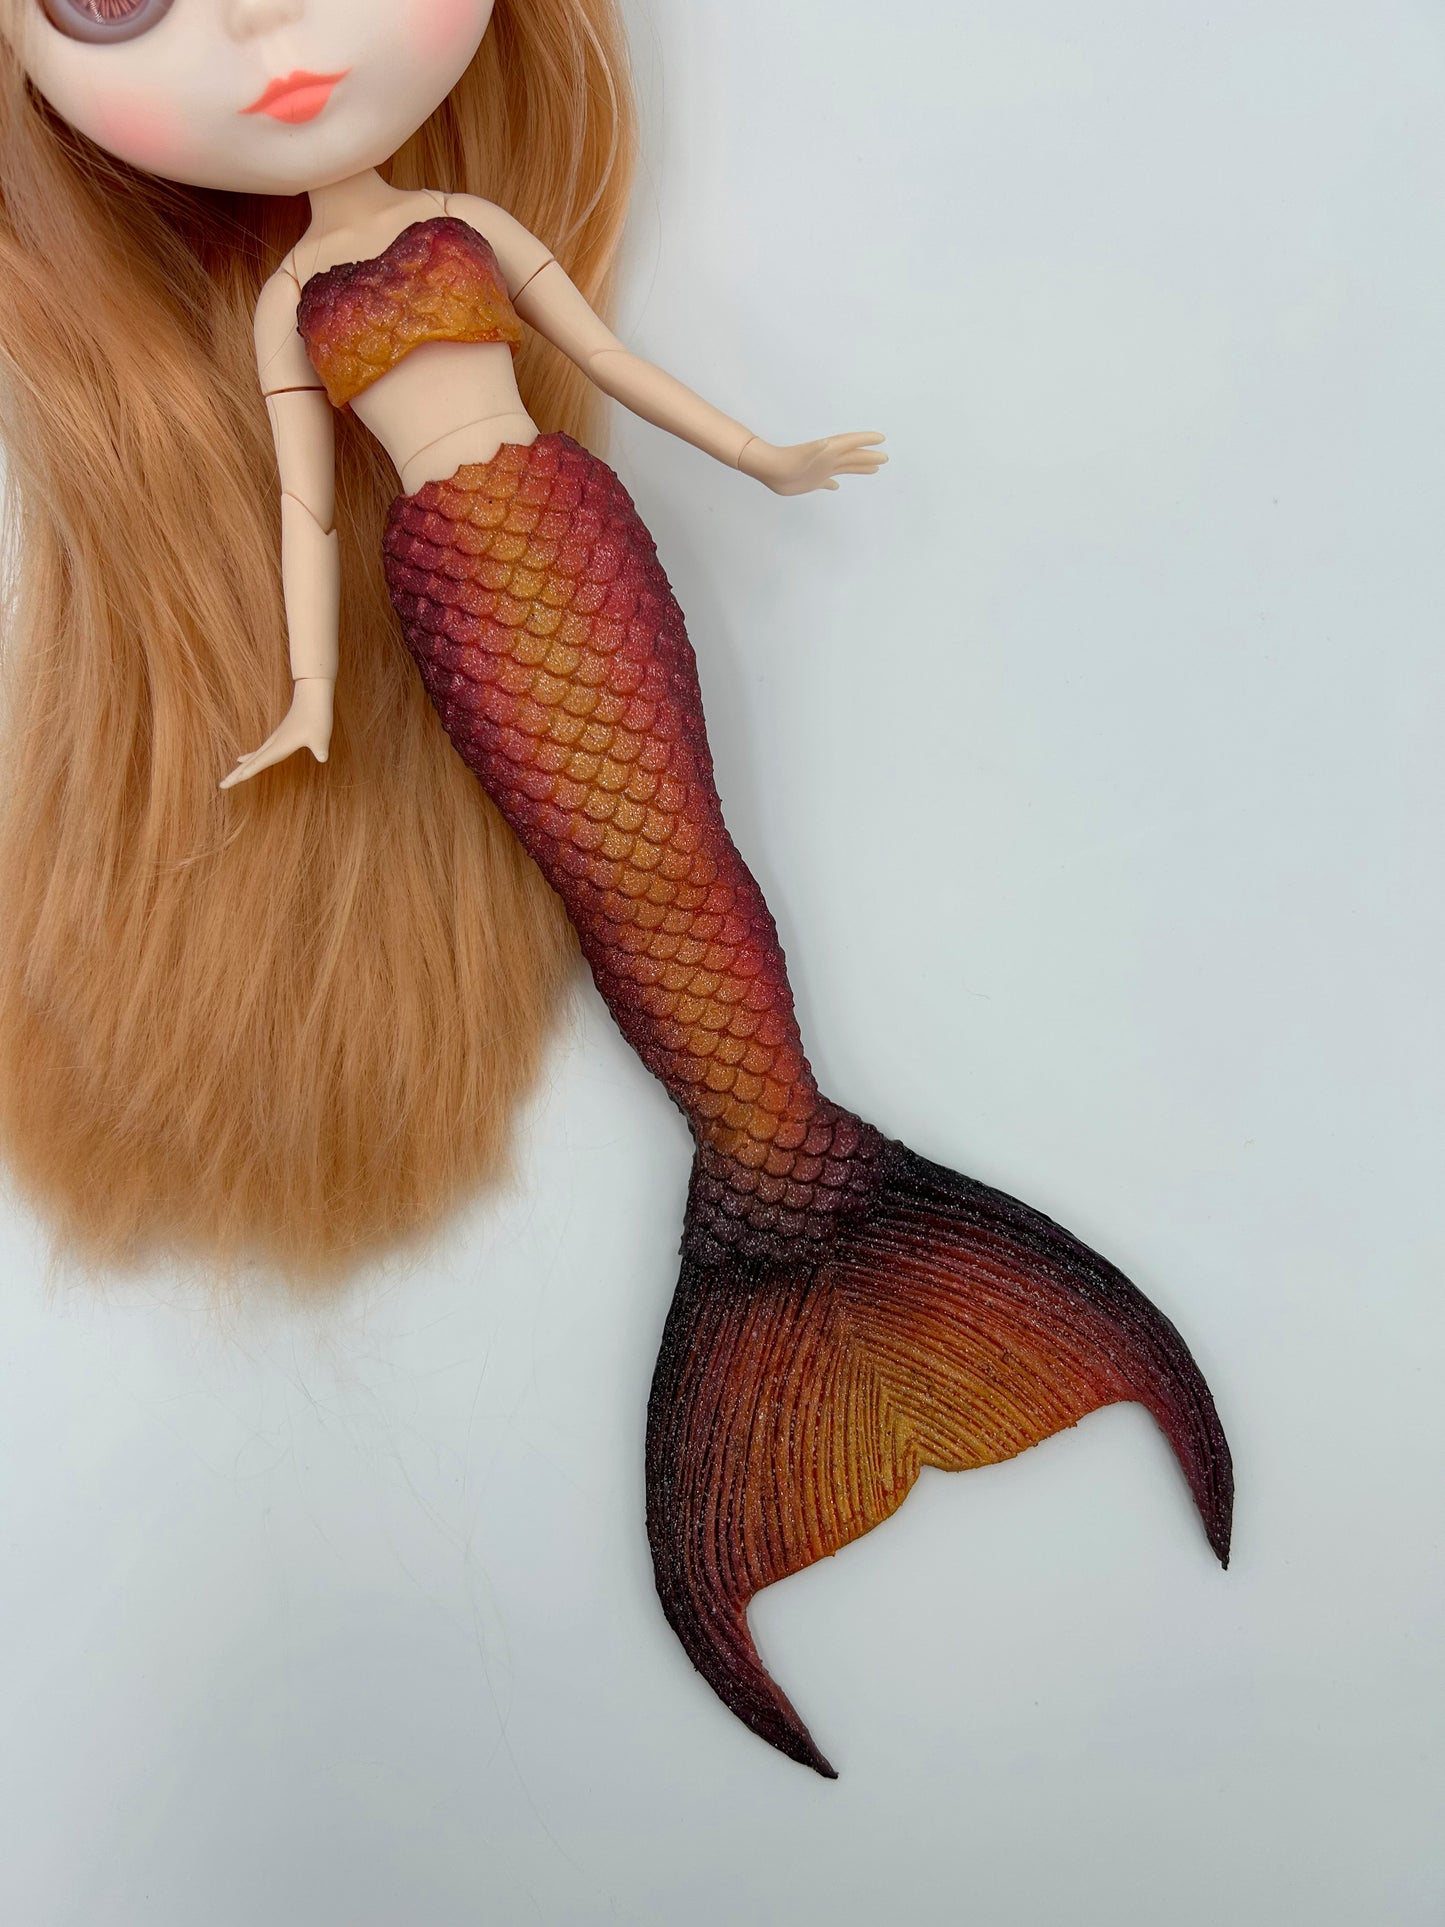 Splash silicone mermaid tail and bra for doll (doll not included)